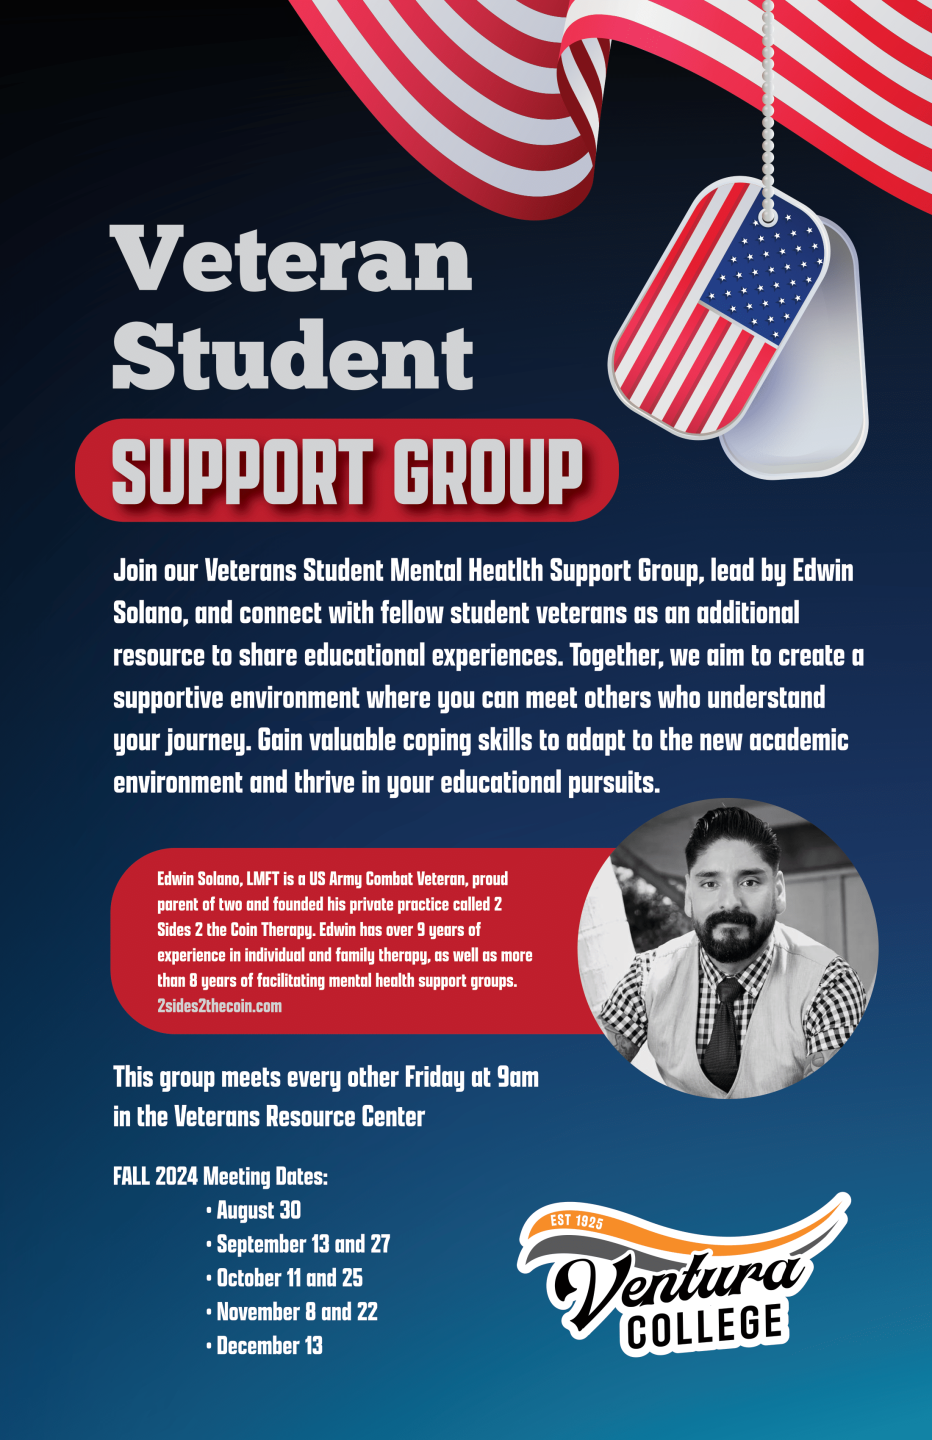 Veteran Student Support Group